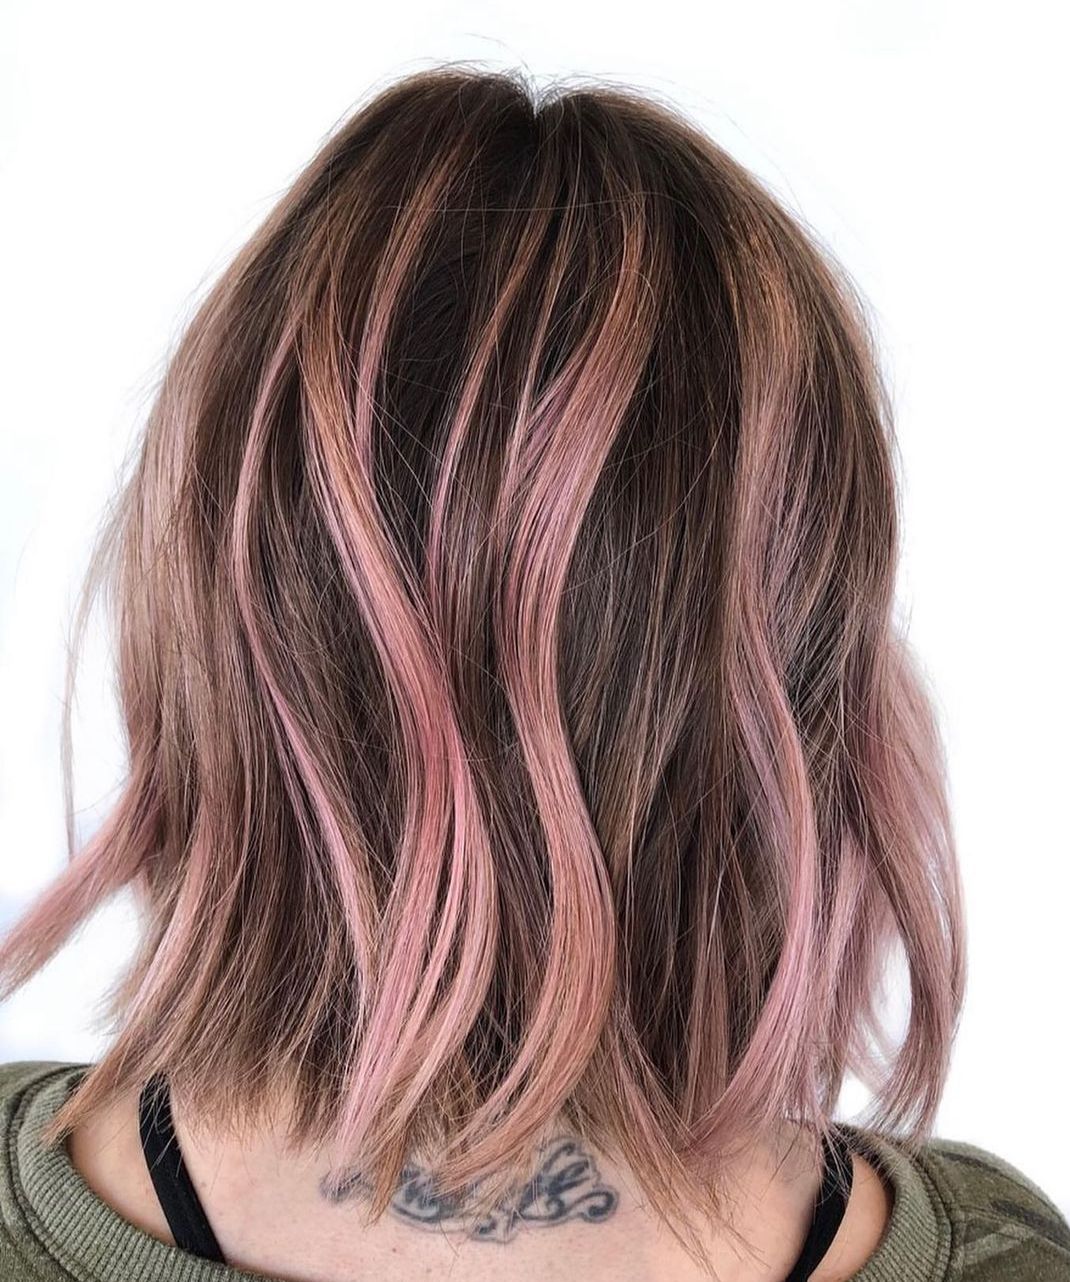 Shoulder Length Cut with Dimensional Pastel Pink Highlights